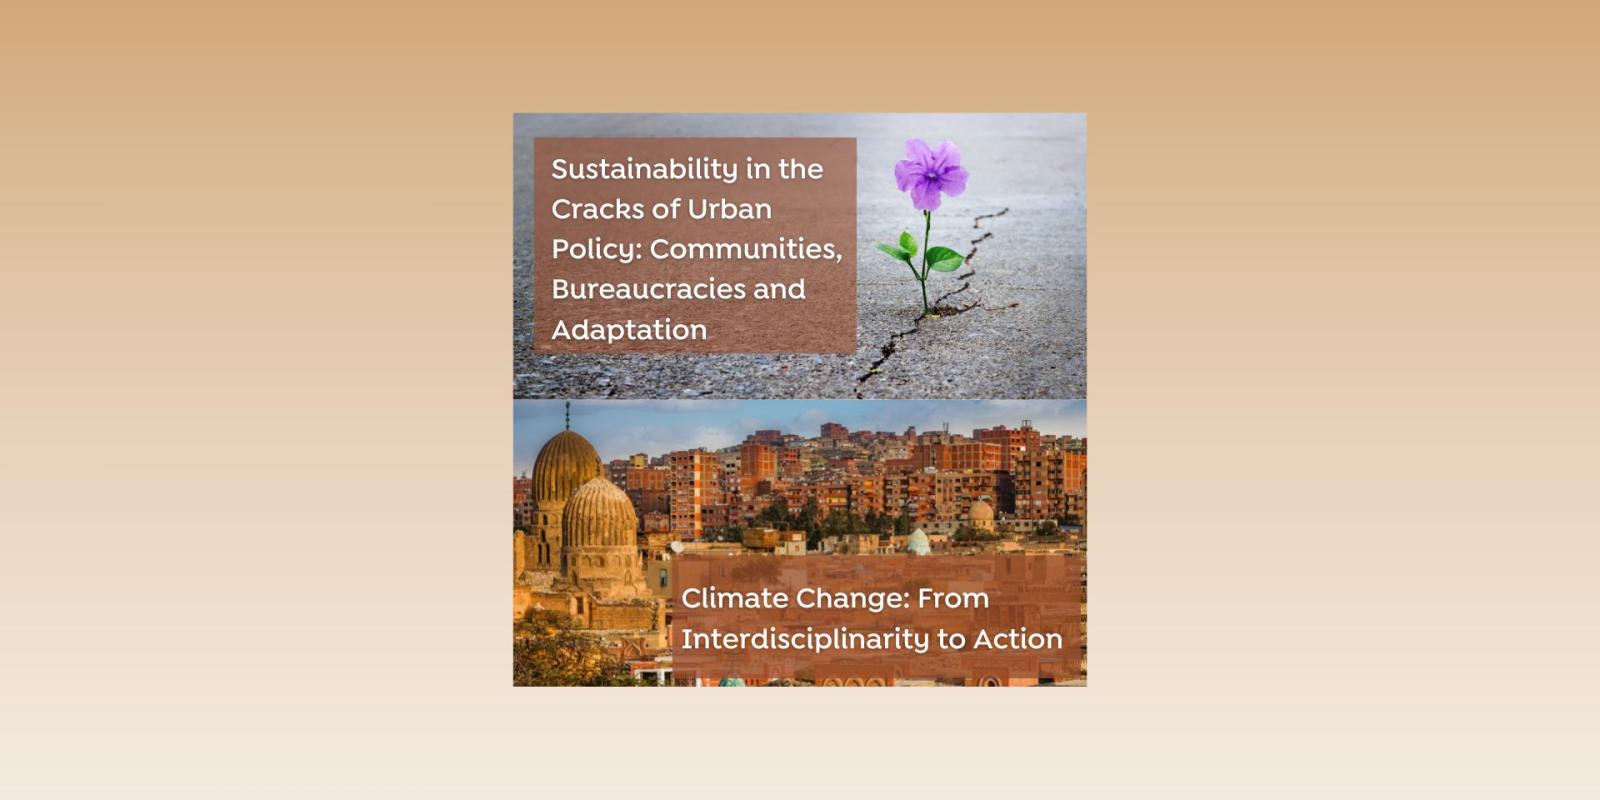 flower growing out of concrete and a cityscape of old Cairo near the citadel with new course titles: Sustainability in the Cracks of Urban Policy: Communities, Bureaucracies and Adaptation and Climate Change: From Interdisciplinarity to Action